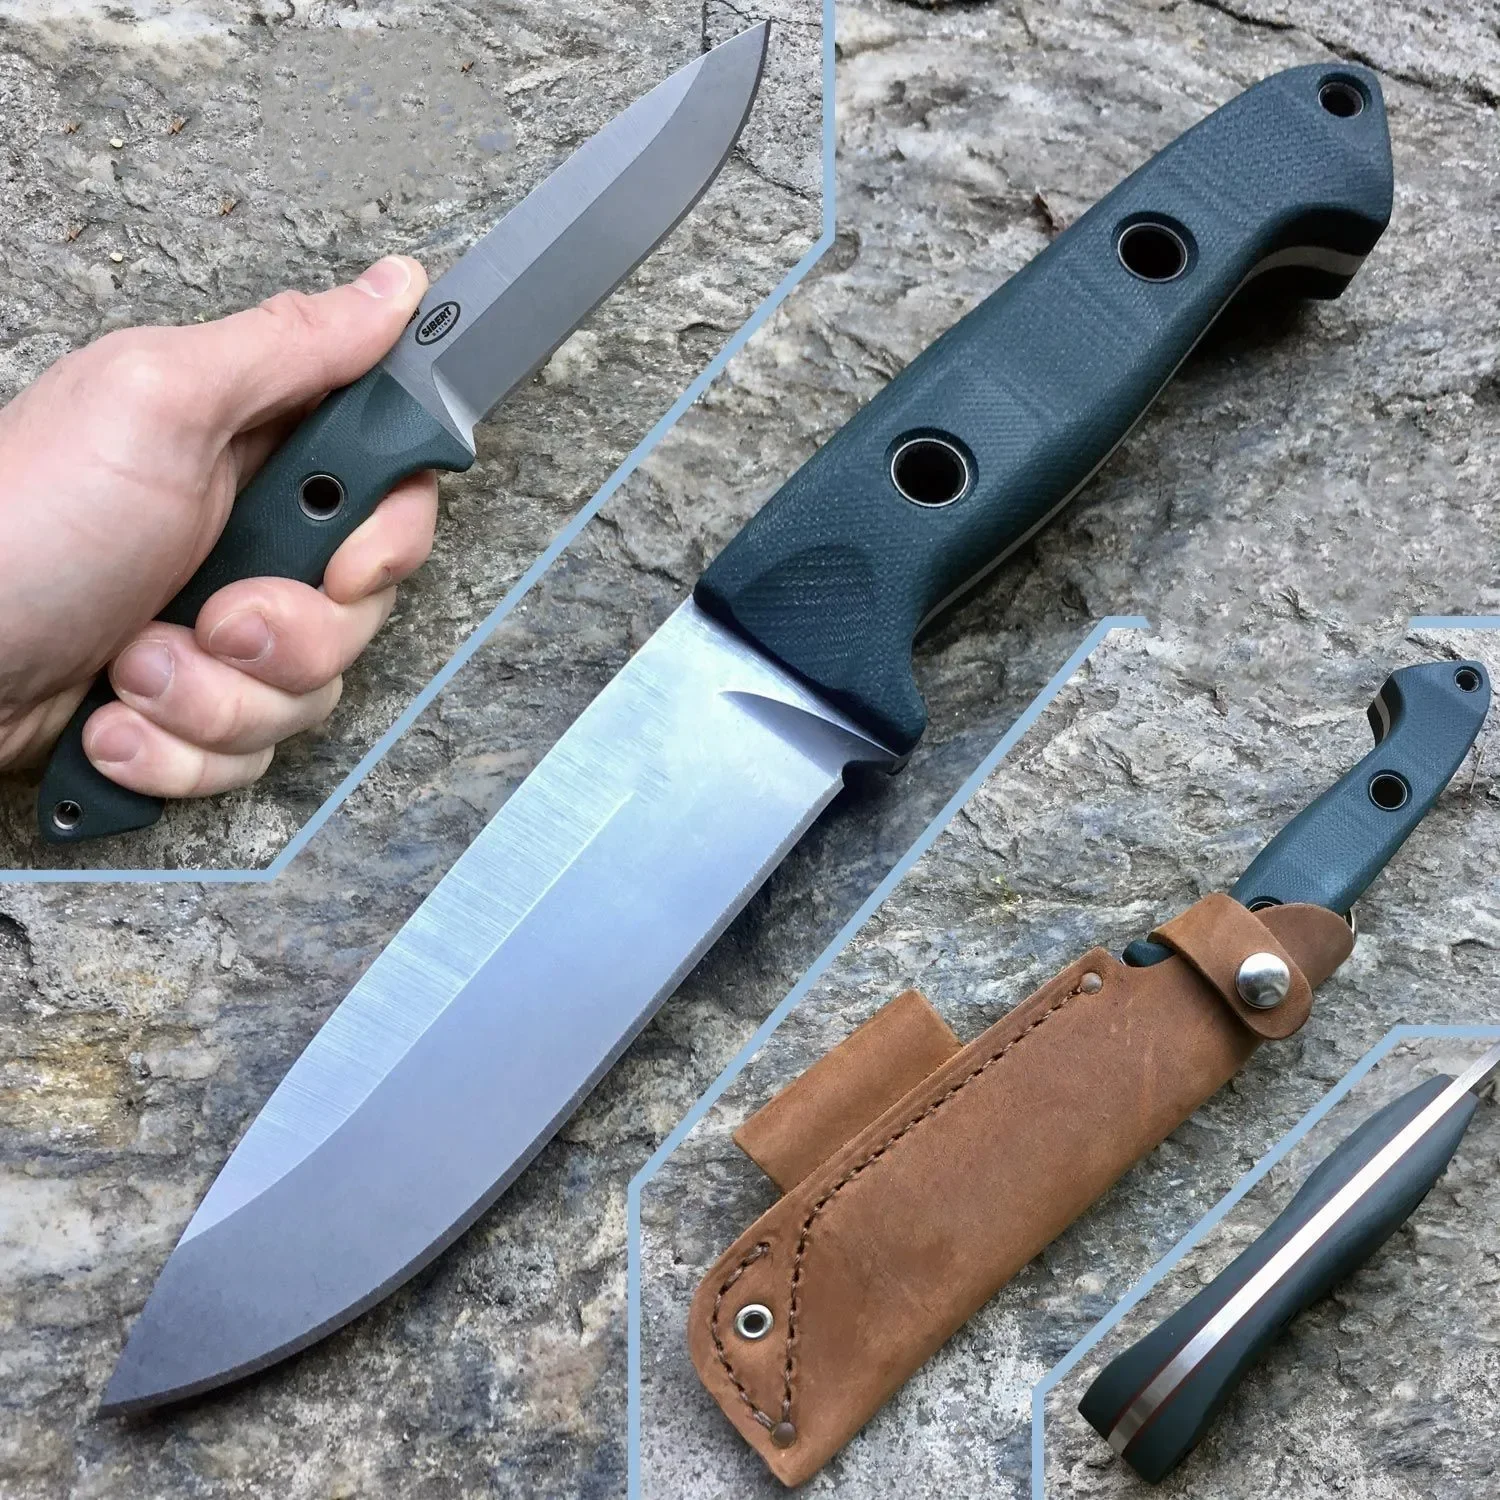 

BM 162 Bushcrafter Fixed Knife S30V Blade G10 Handles with Cowhide Sheath Outdoor Camping Hunting Knives Tactical Survival Tool